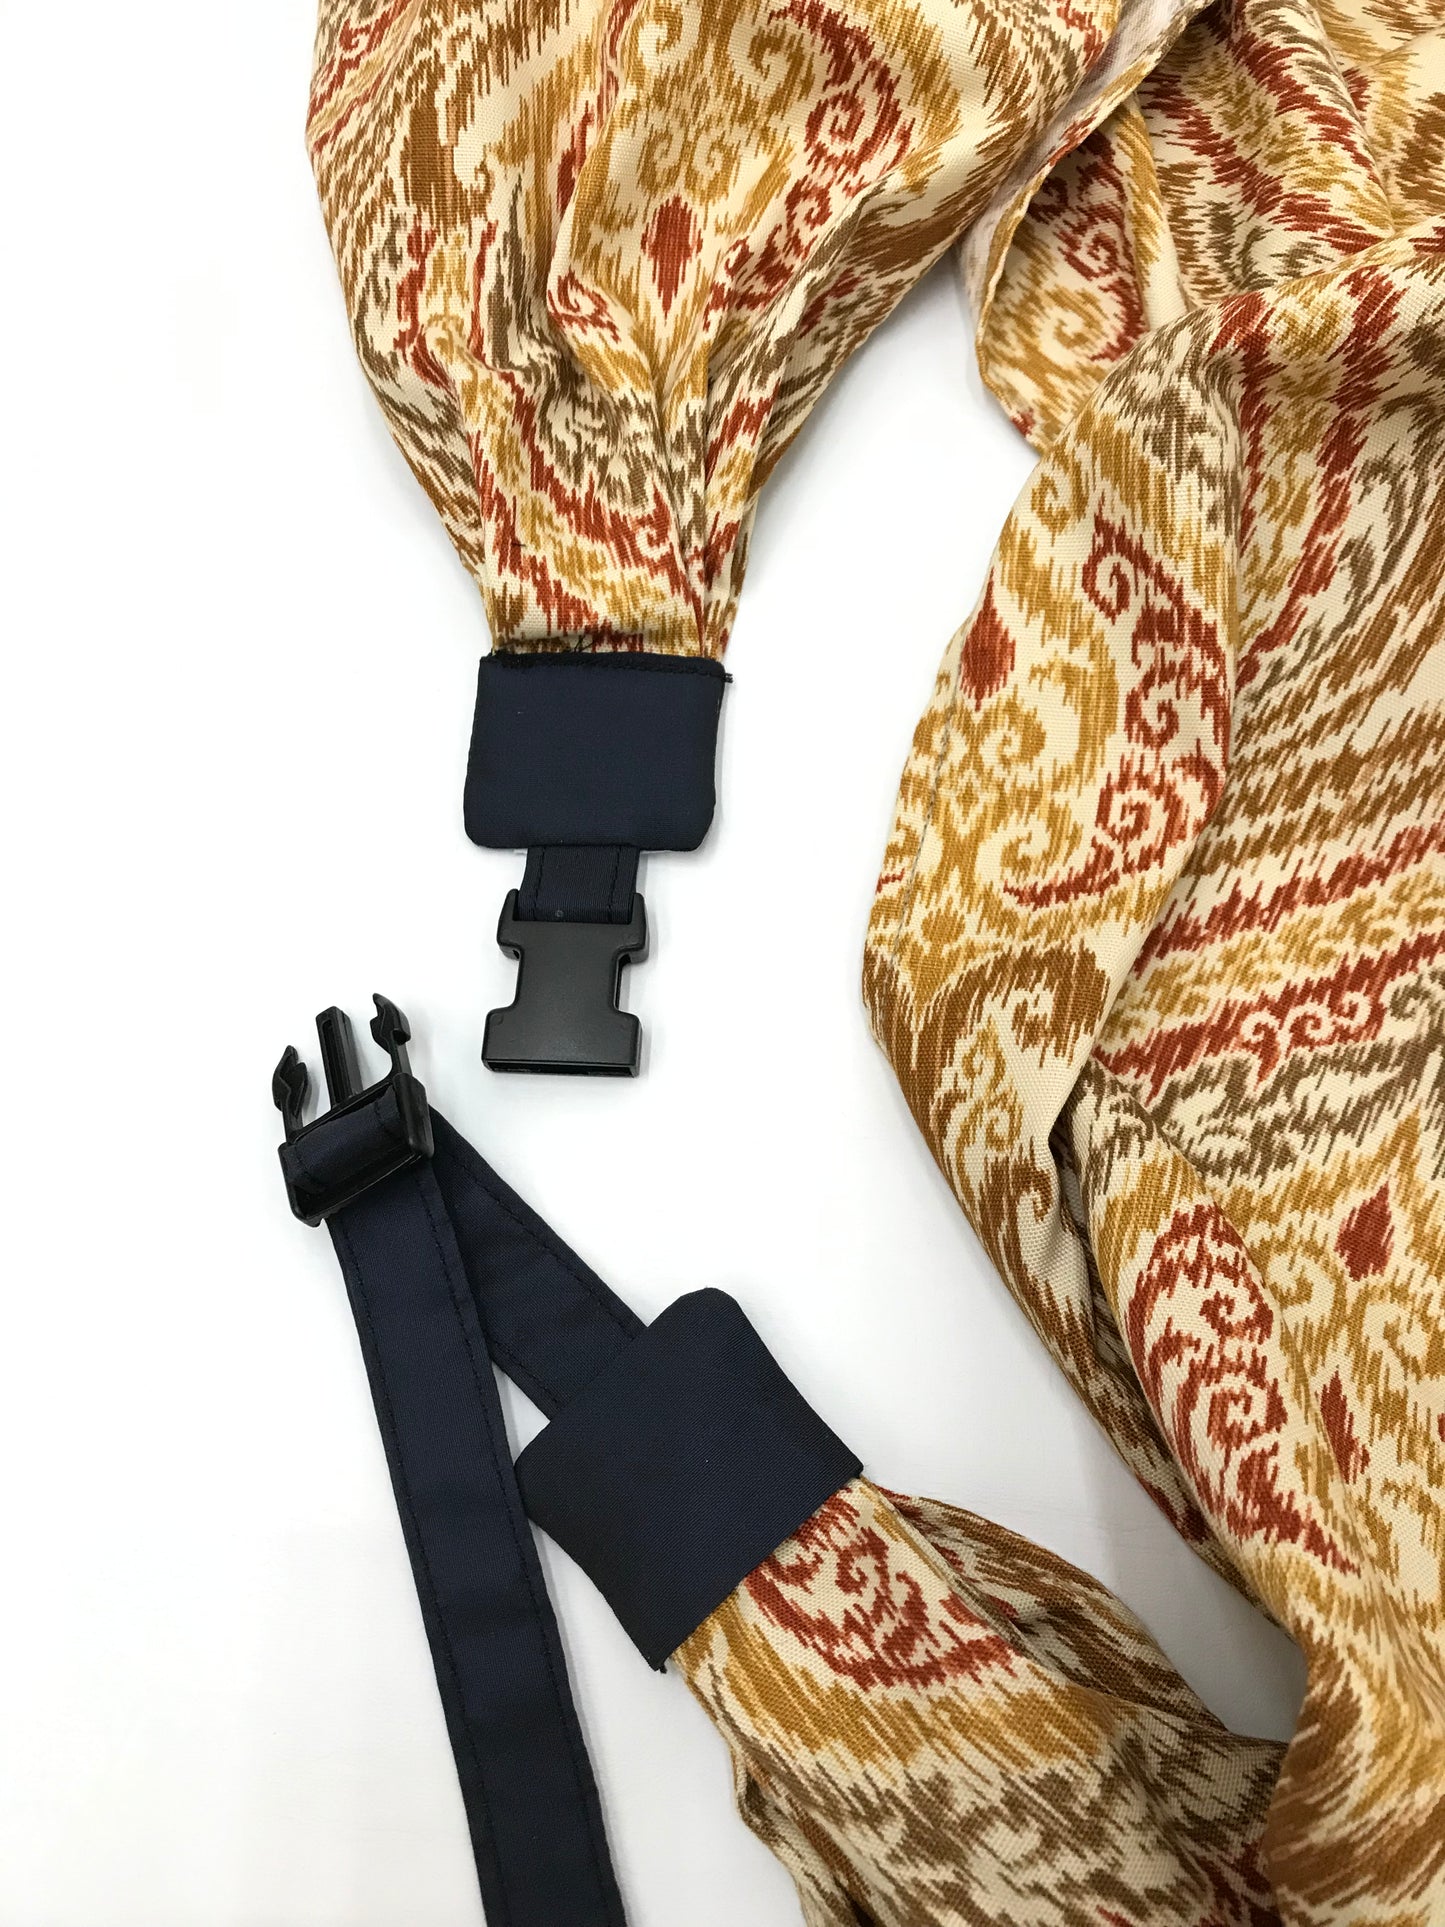 Turn your infinity scarf into a support for your meditation practice, quick snap and adjust to align the spine and sit in comfort. Created by My Yoga Room Elements and produced in Canada . Orange and Gold Damask